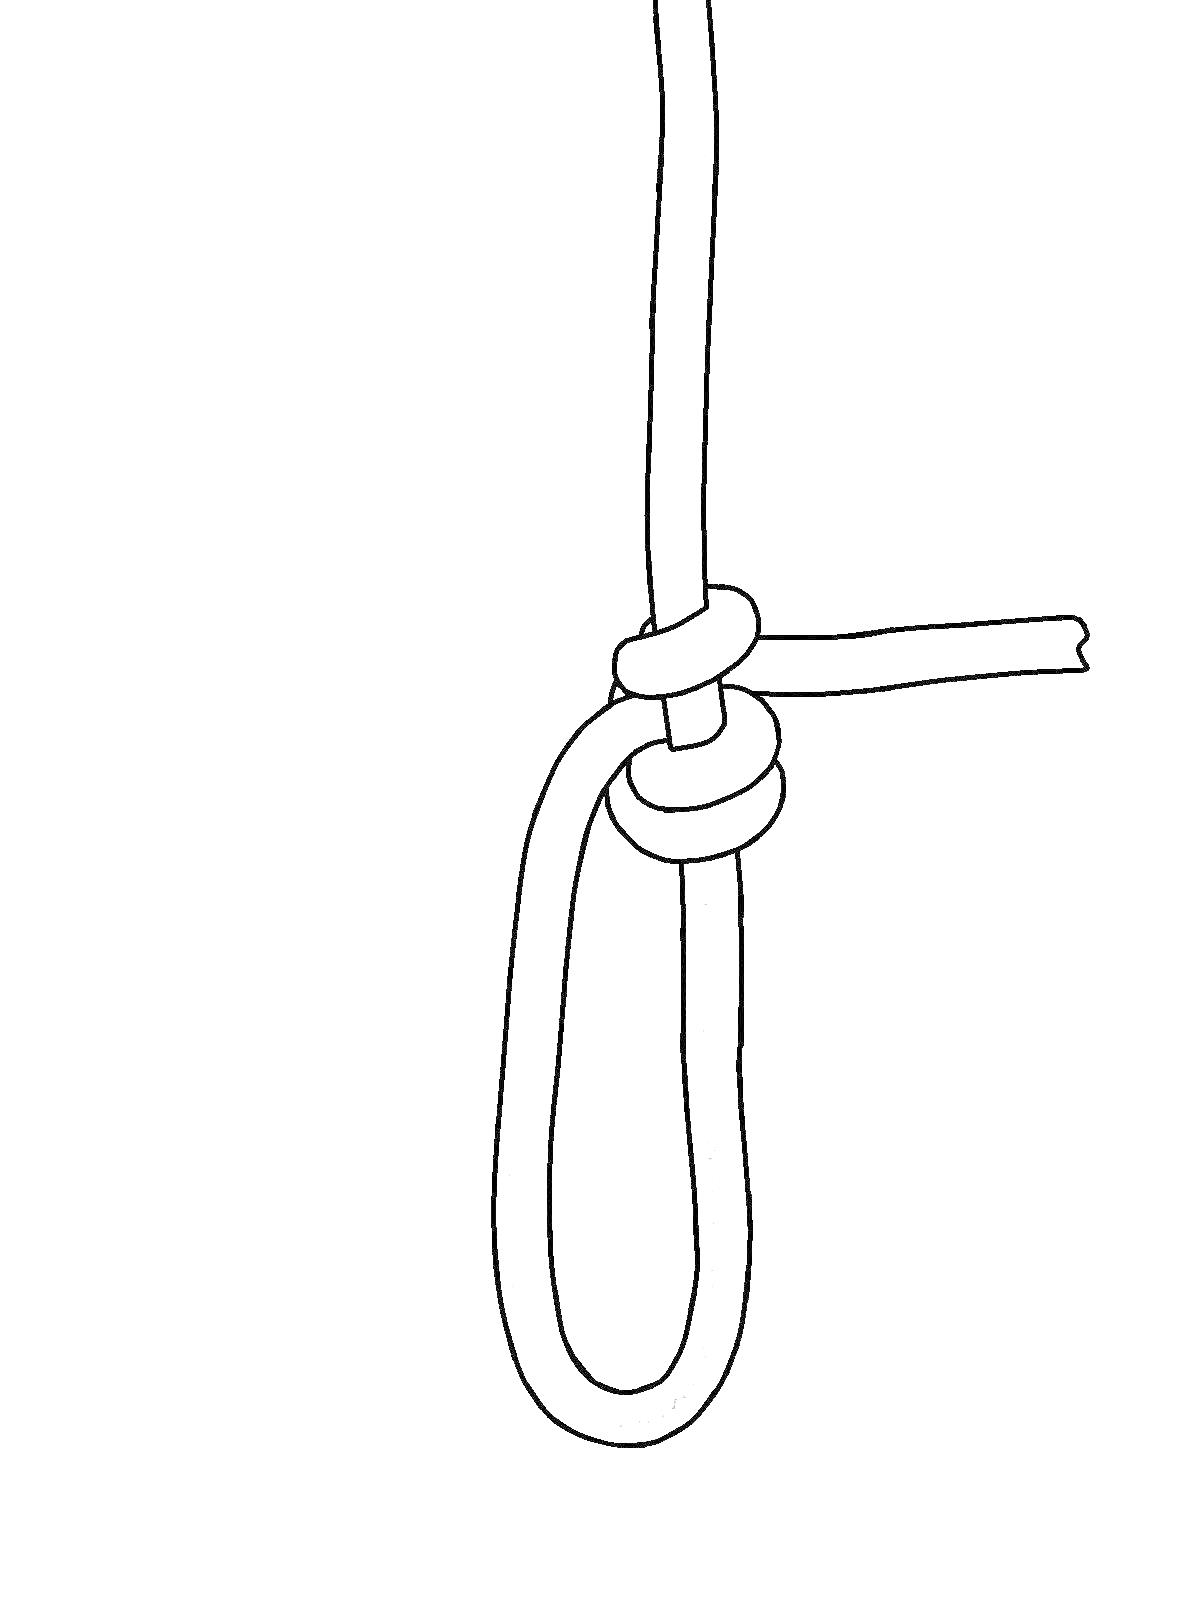 New Approaches with Knot Tying: Use the Blakes Hitch Instead of the Taut- line